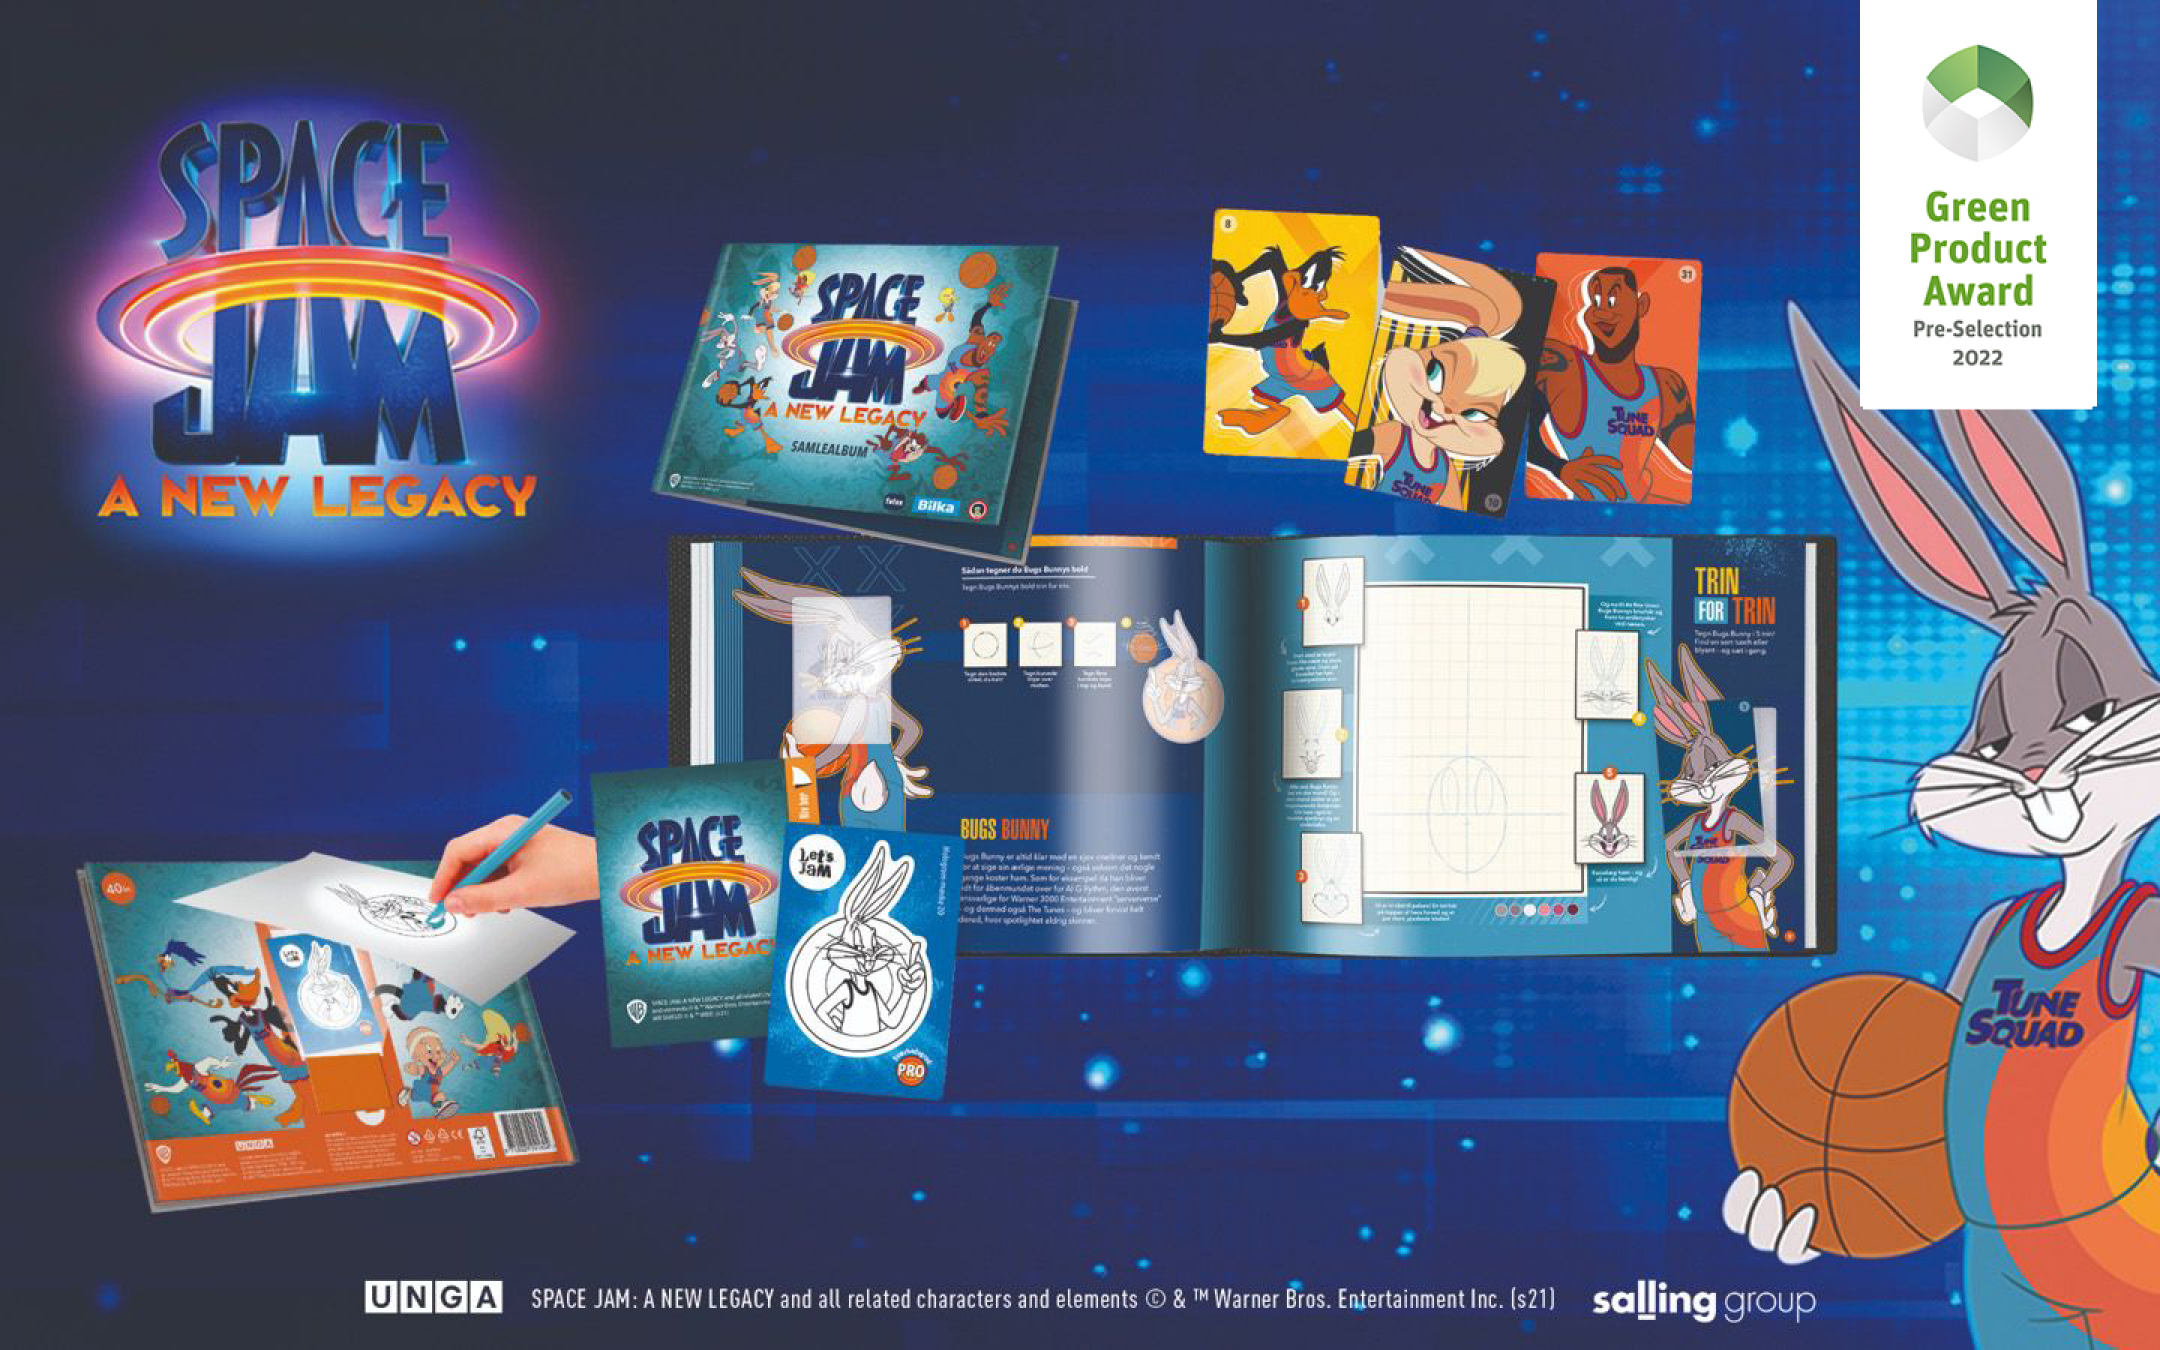 Space Jam: A New Legacy toys